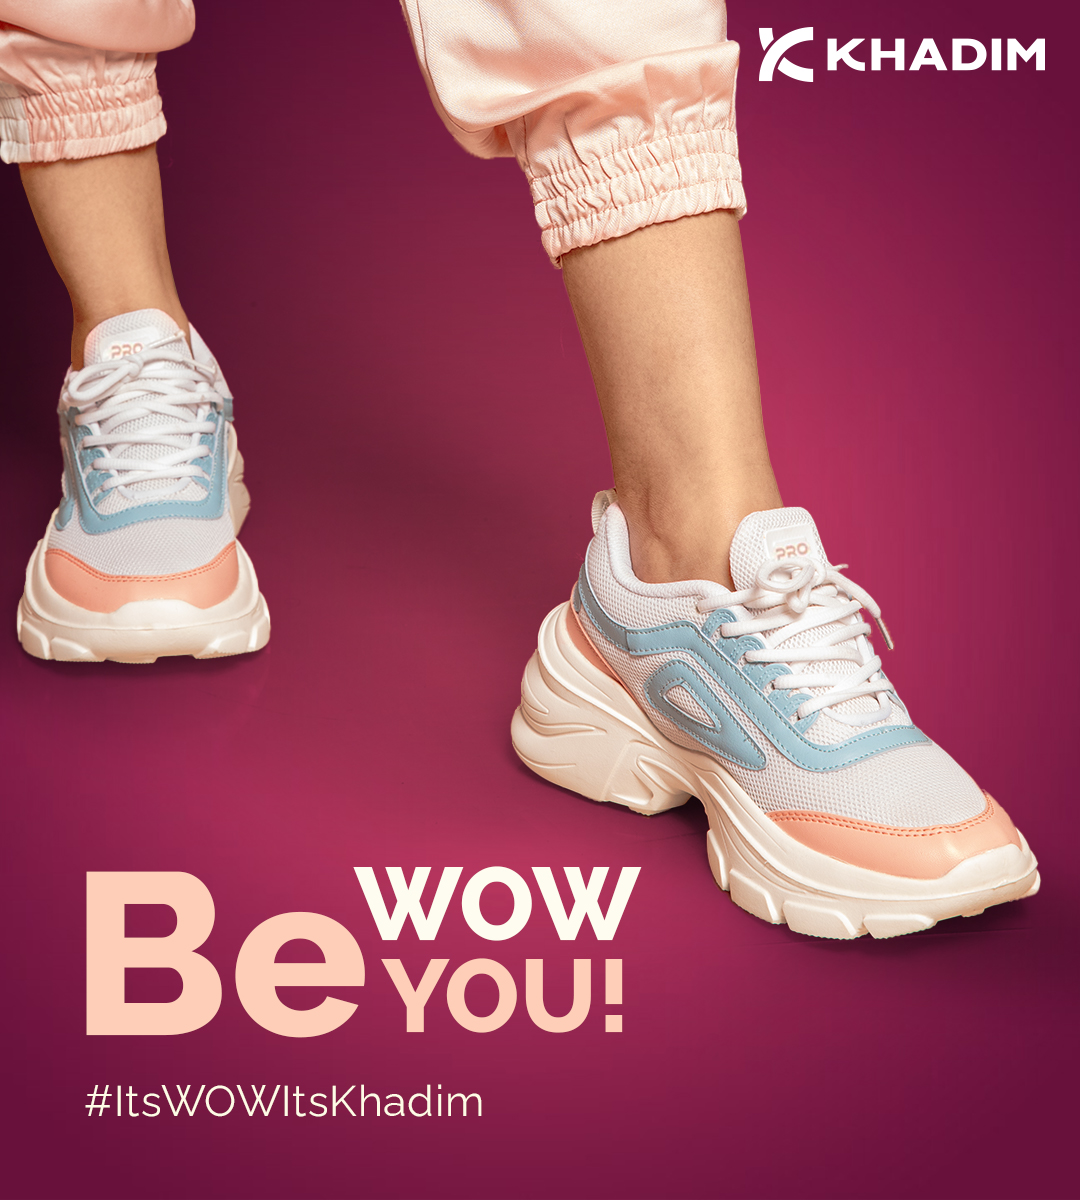 Style that brings out the new in you.

Visit your nearest Khadim store today!

#Khadims #ItsWOWItsKhadim #style #sneakers